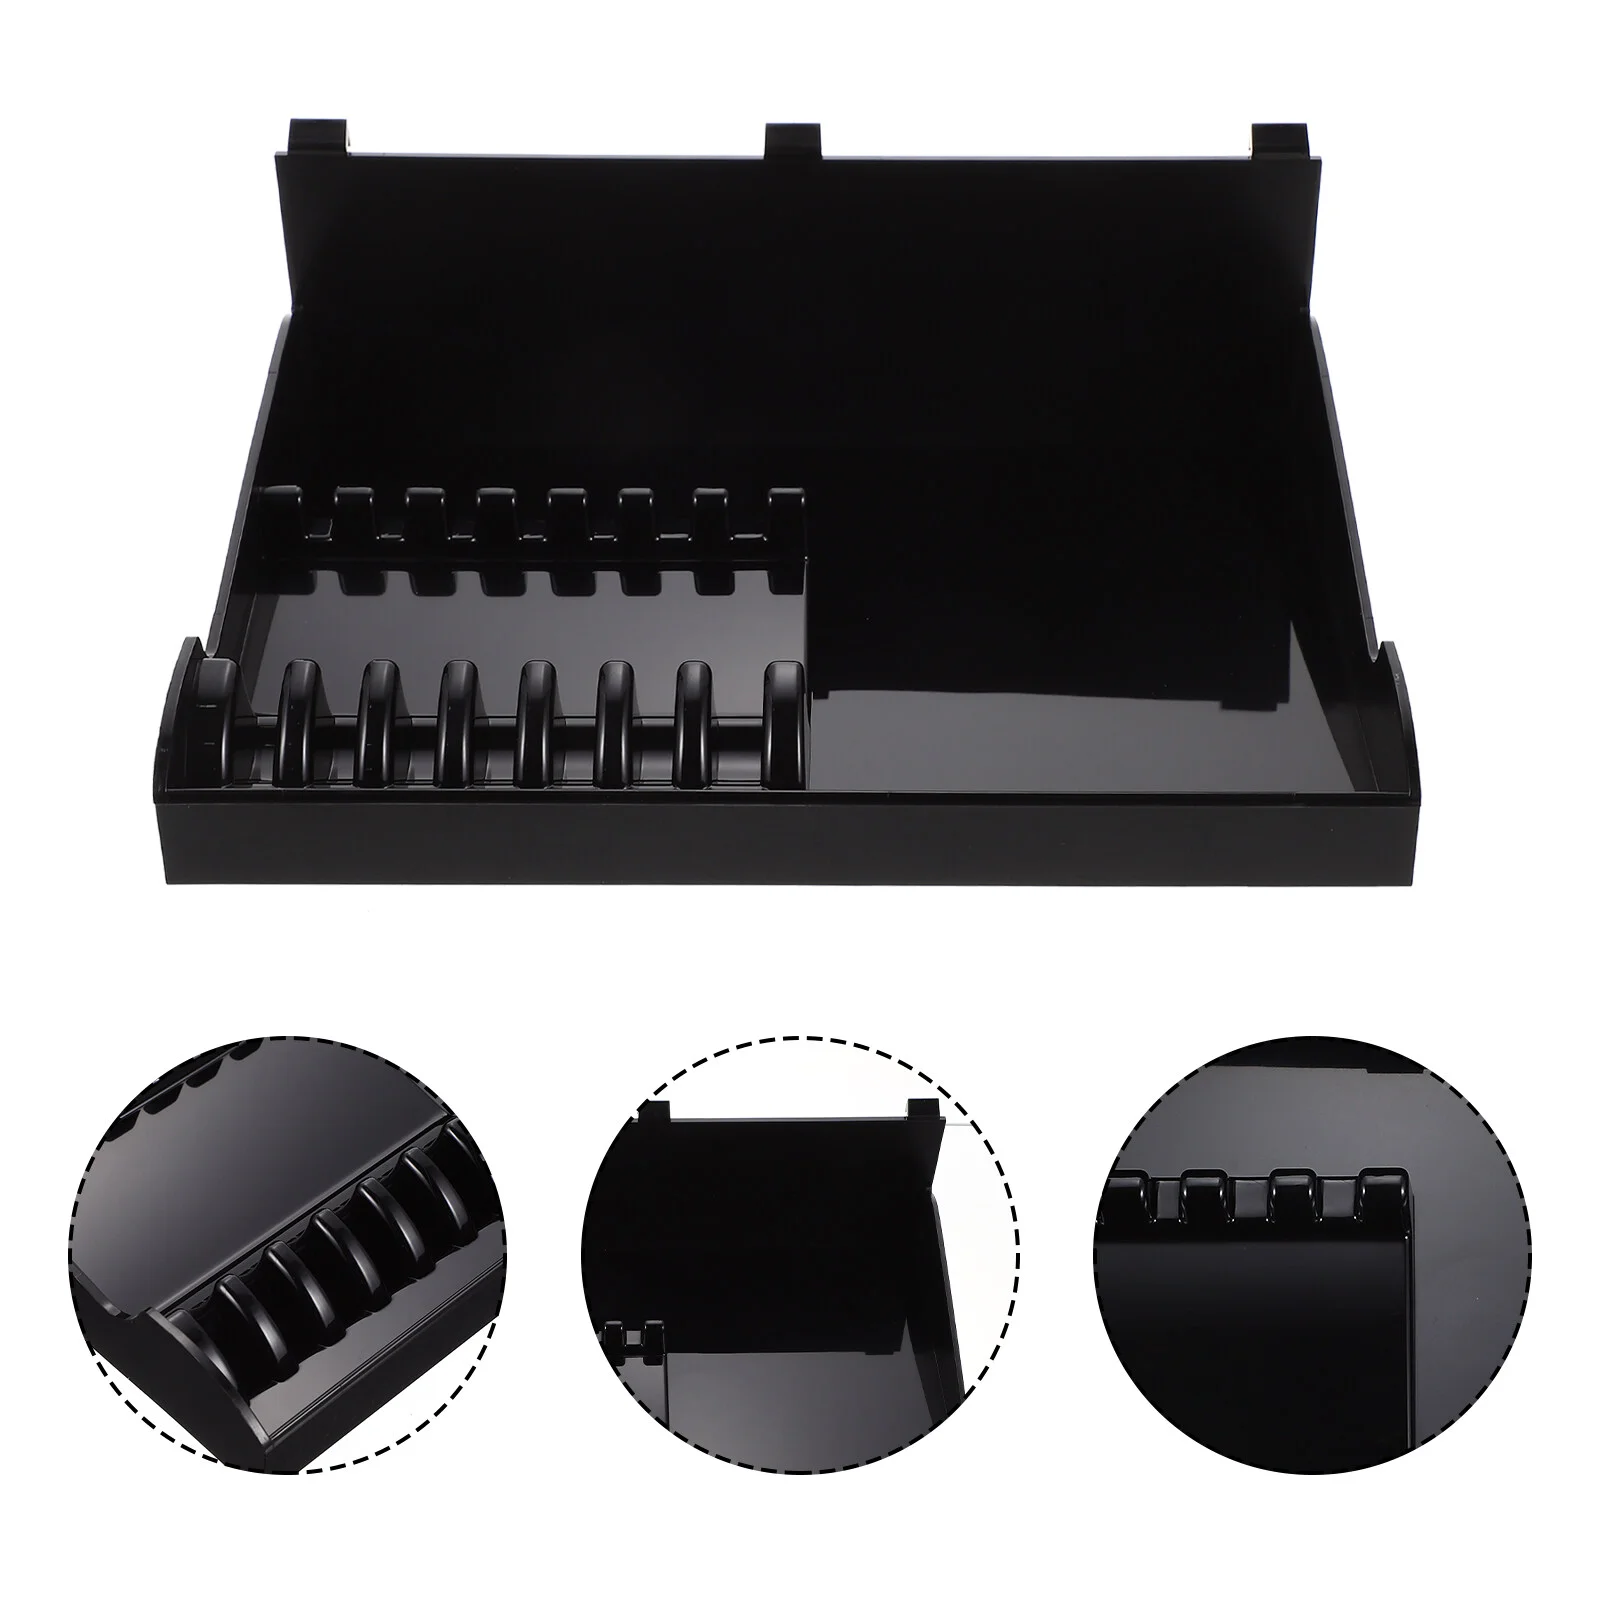 

Scissors Comb Socket Hairdressing Shear Organizers Tools Holder Plastic Container Stand Multi-function Rack Abs Dryer